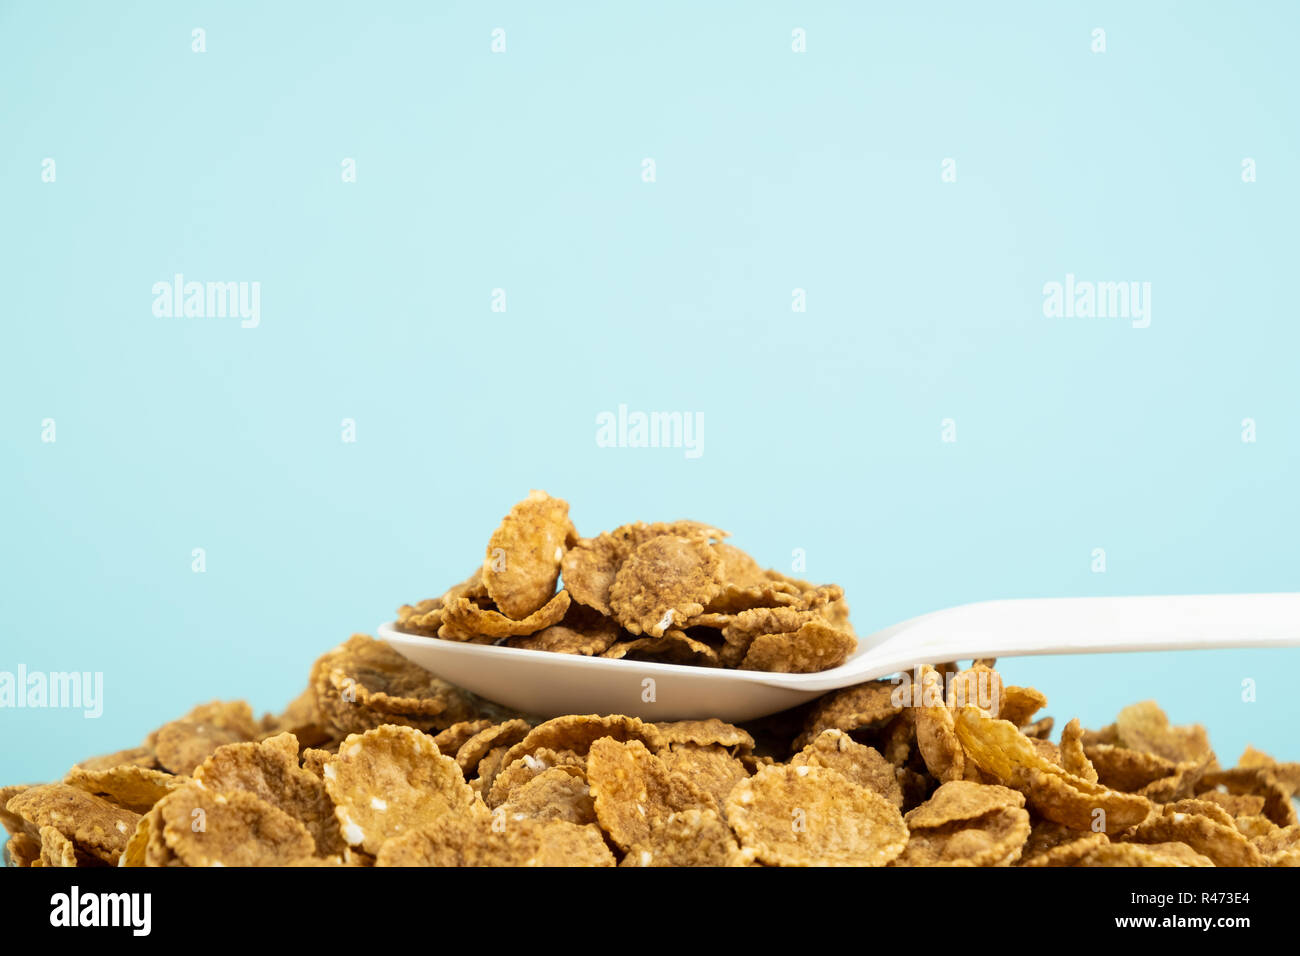 Heap of whole grain cereals in blue background. Healthy breakfast concept: close-up image of spoon full of muesli Stock Photo